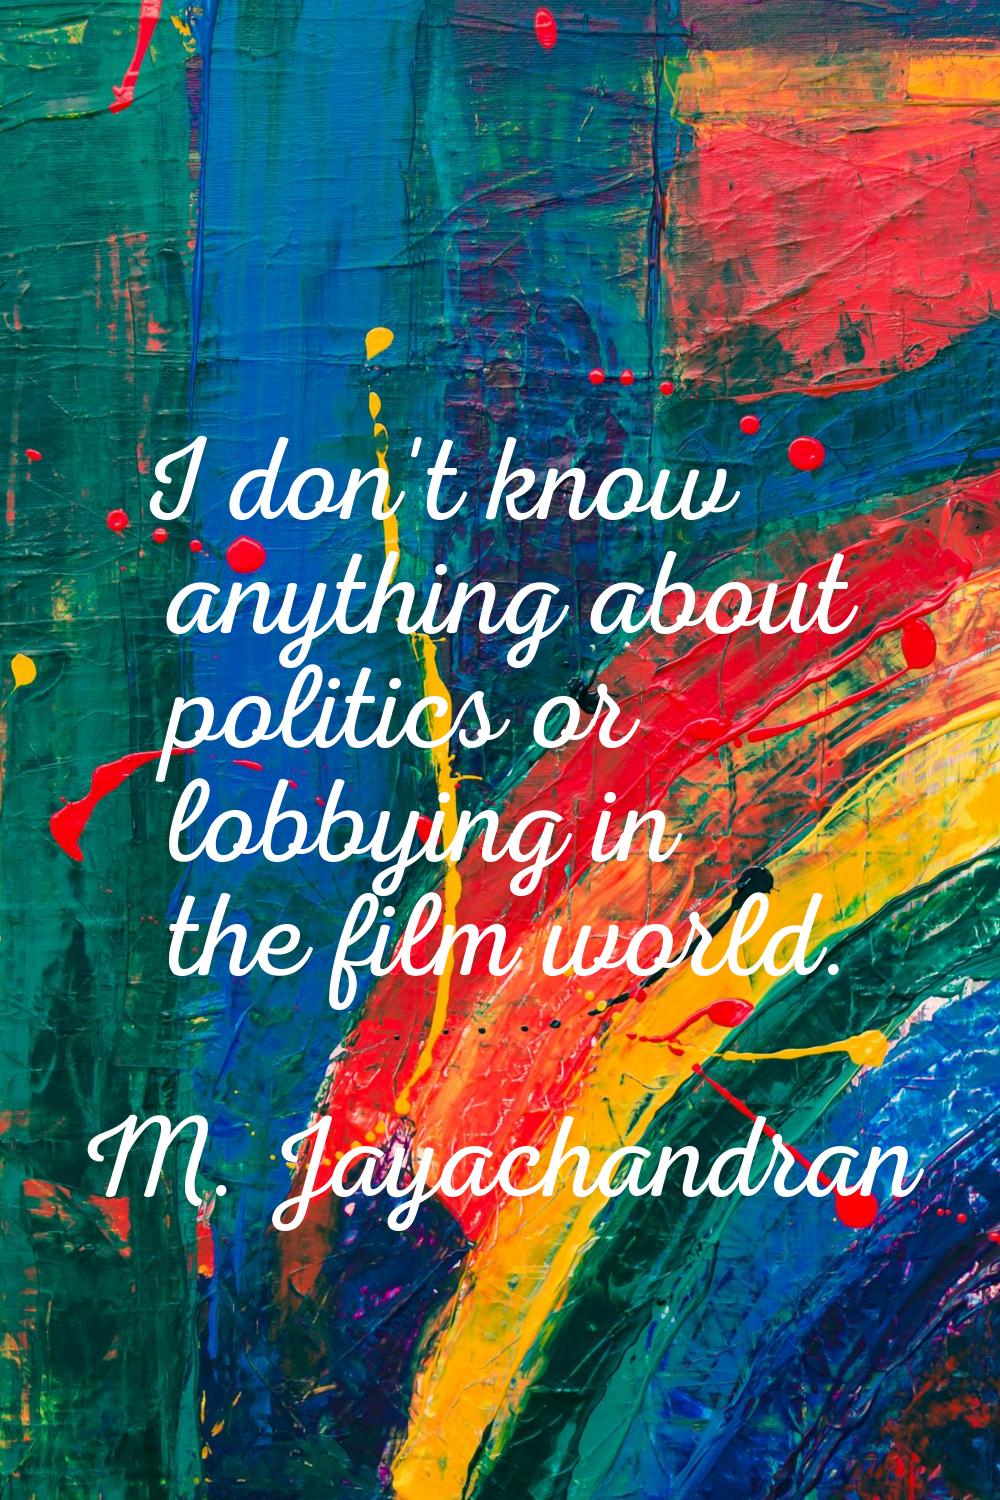 I don't know anything about politics or lobbying in the film world.